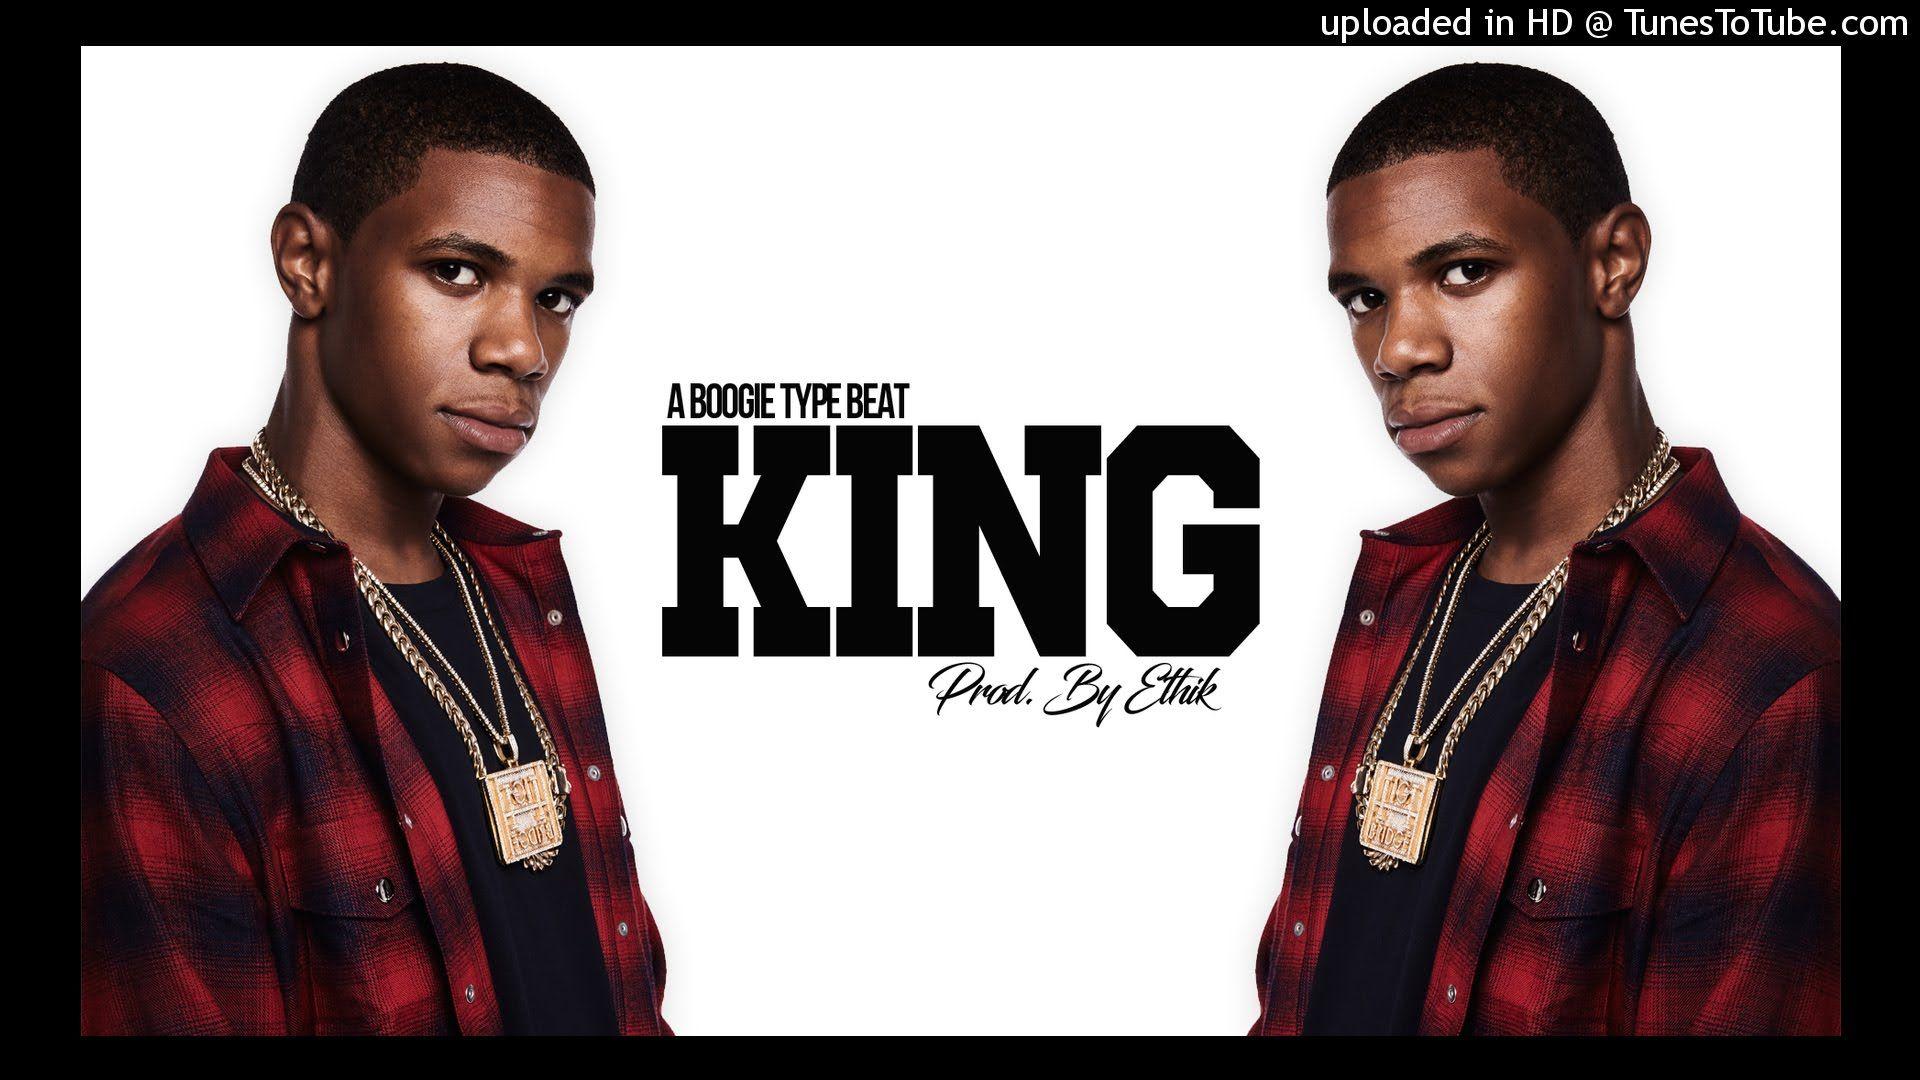 A Boogie Wit Da Hoodie Wallpapers - Wallpaper Cave